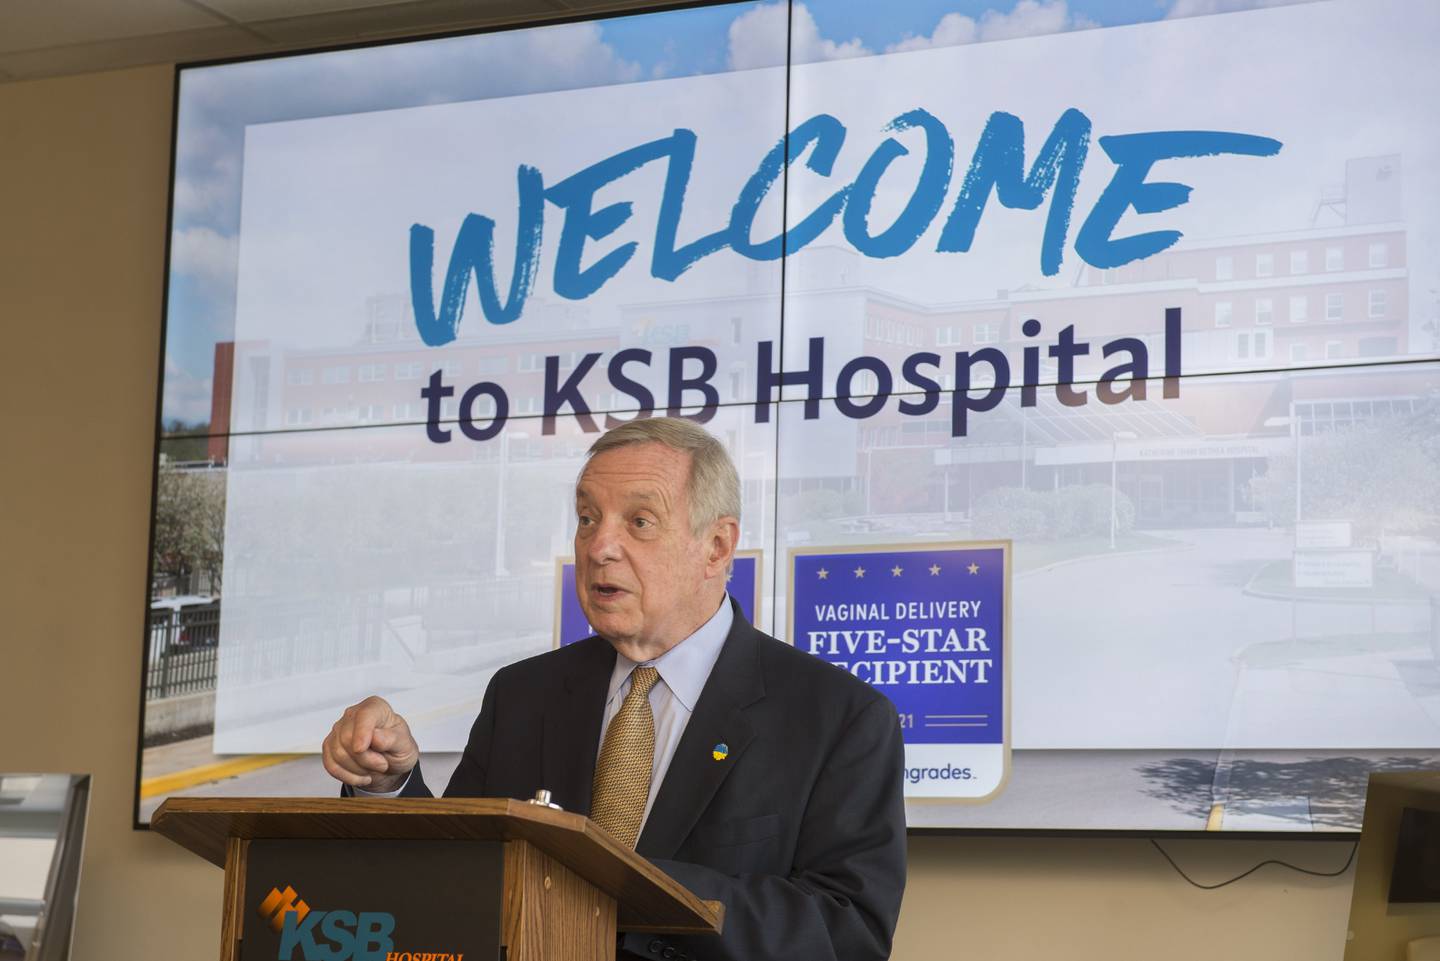 Senator Dick Durbin talks on Thursday, July 7, 2022 about the grant awarded to KSB by the federal government to help update the neonatal ward at the hospital.